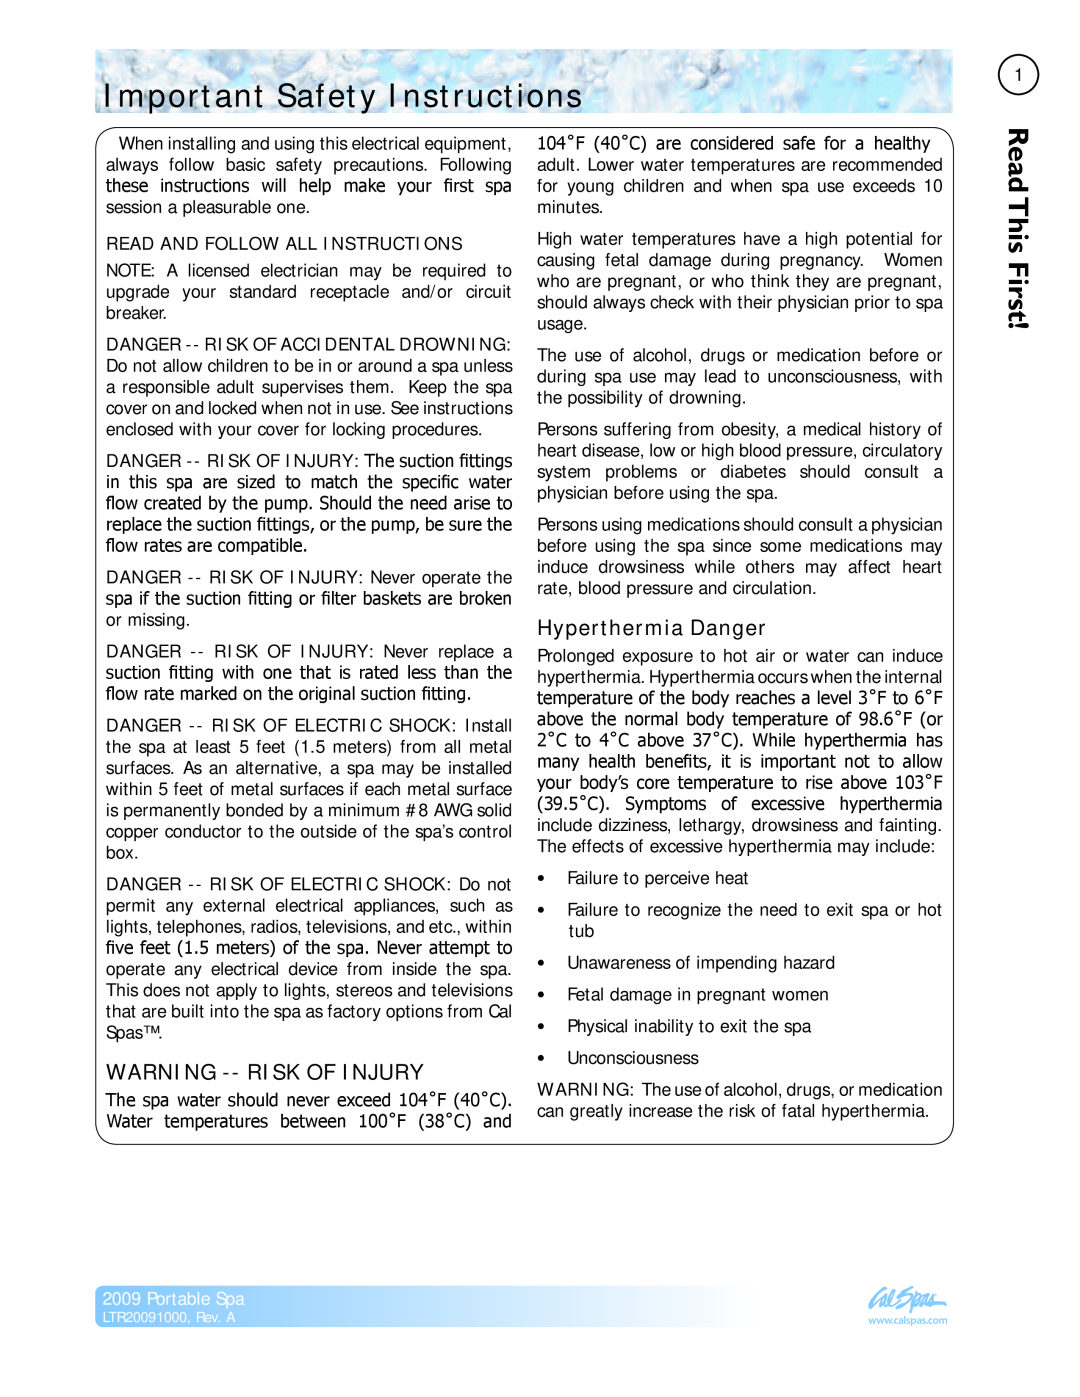 Cal Flame Portable Spa manual Important Safety Instructions, Read This First, Warning --Risk Of Injury, Hyperthermia Danger 